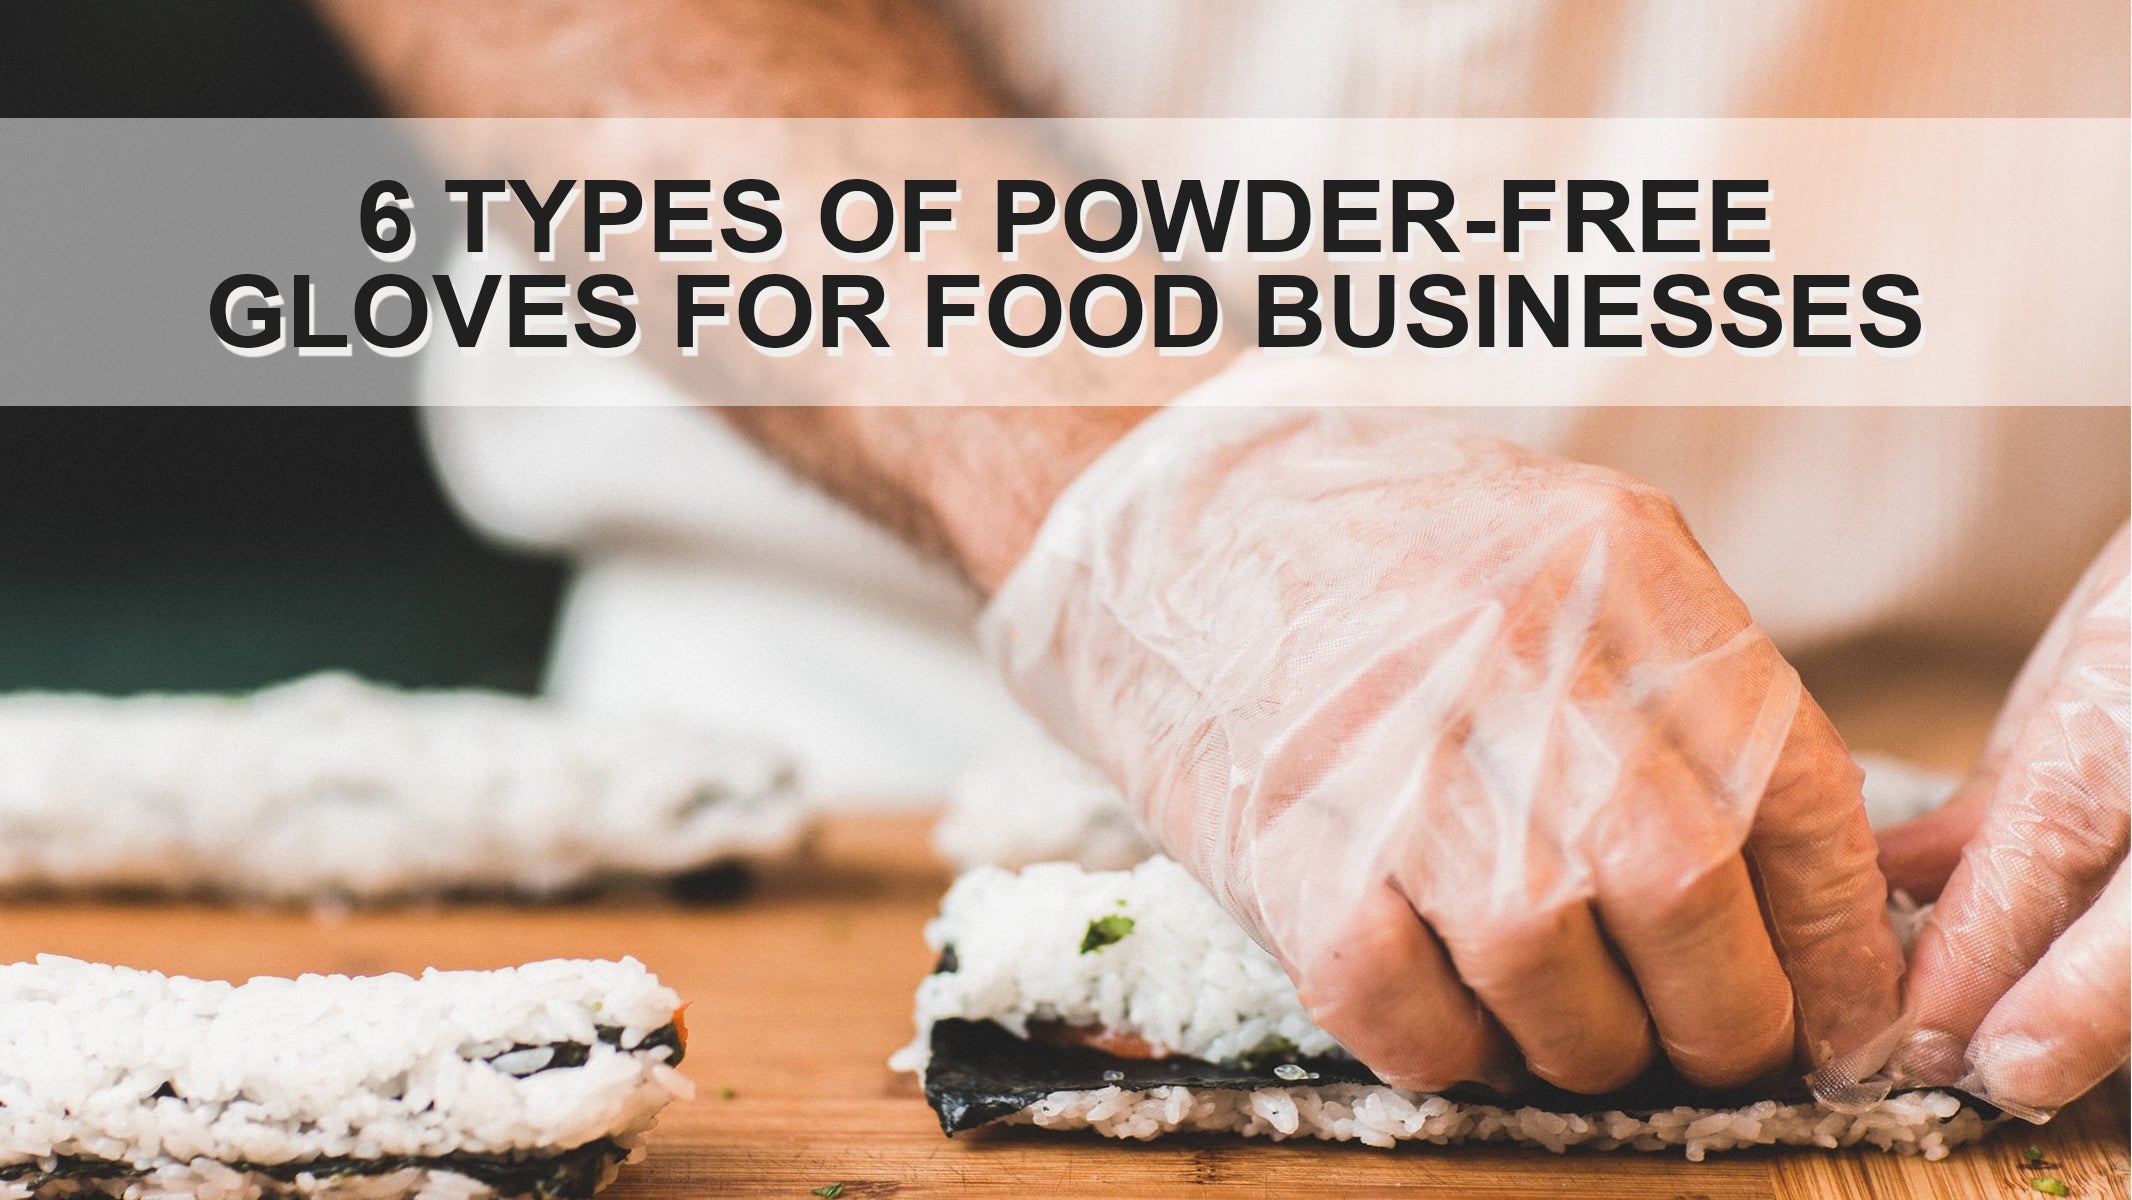 6 Types of Powder-Free Gloves for Food Businesses